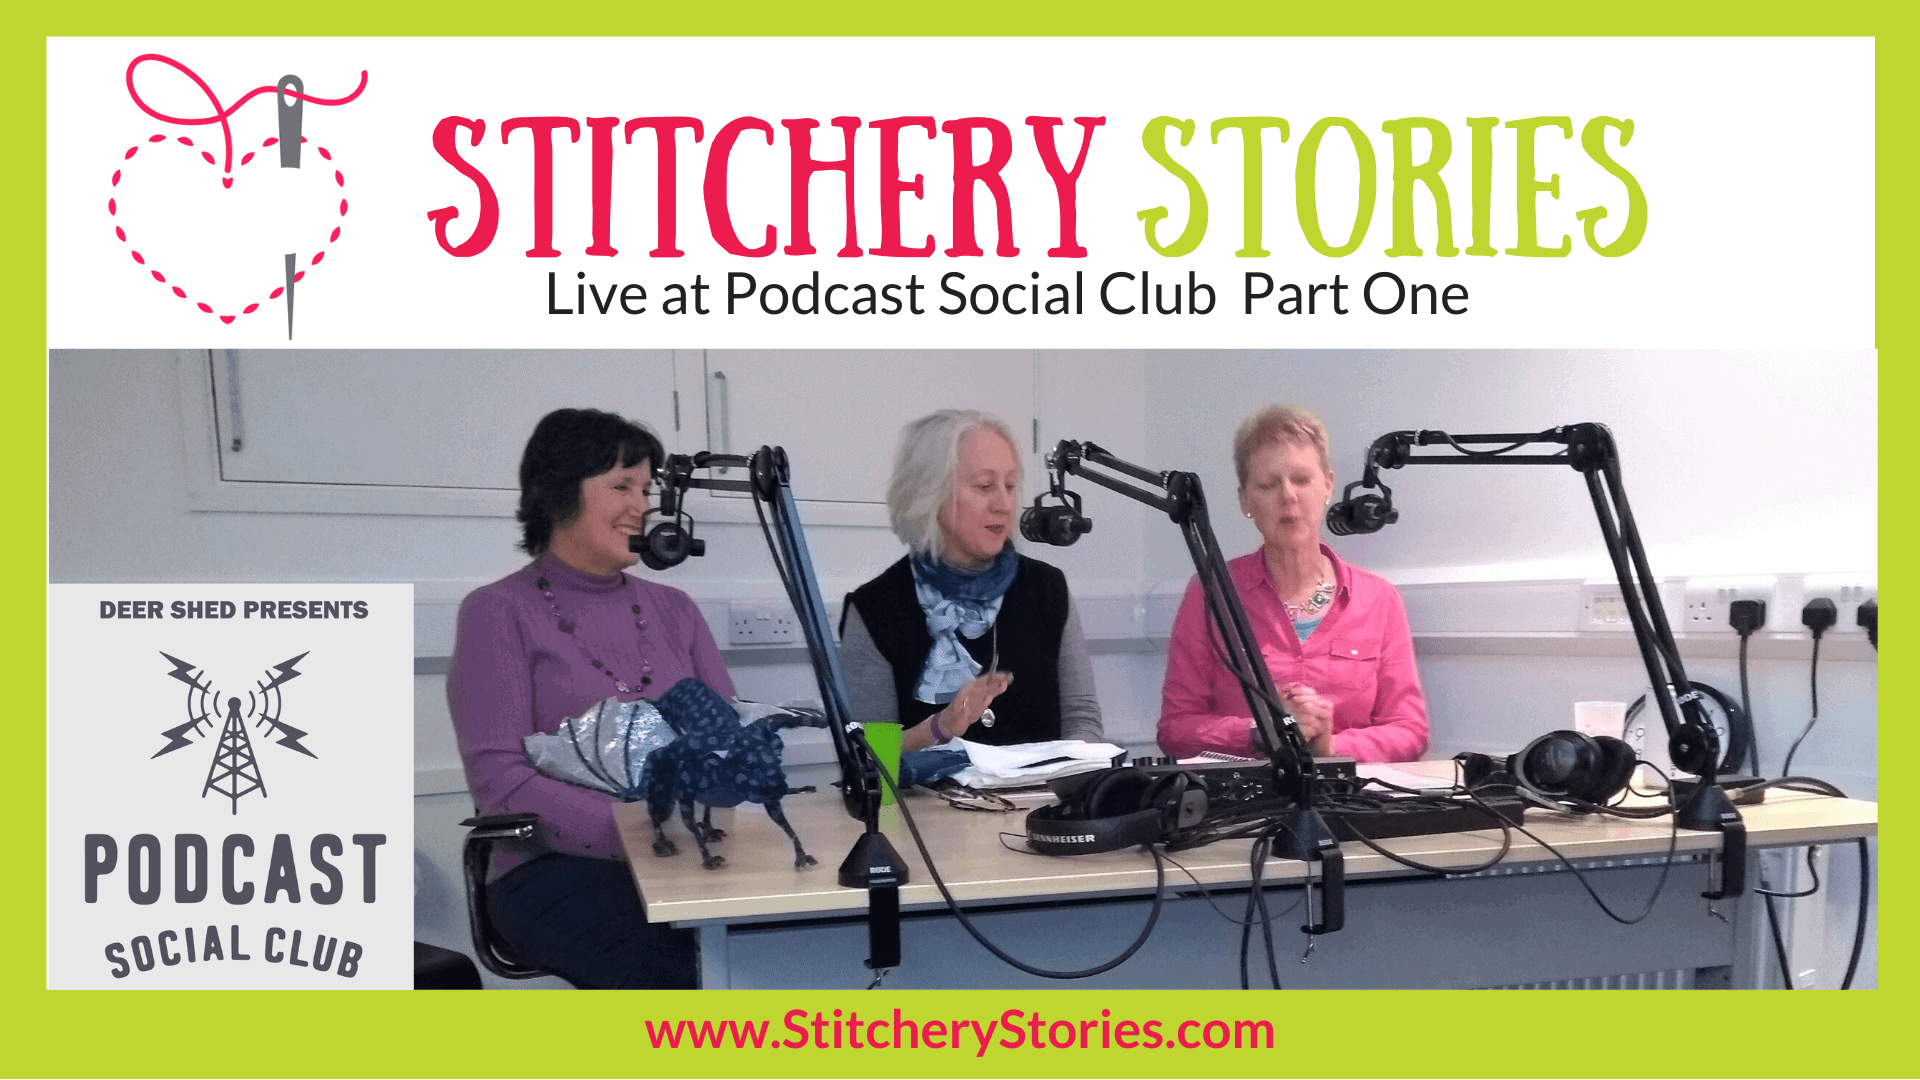 Stitchery Stories Live at Podcast Social Club Wide Art